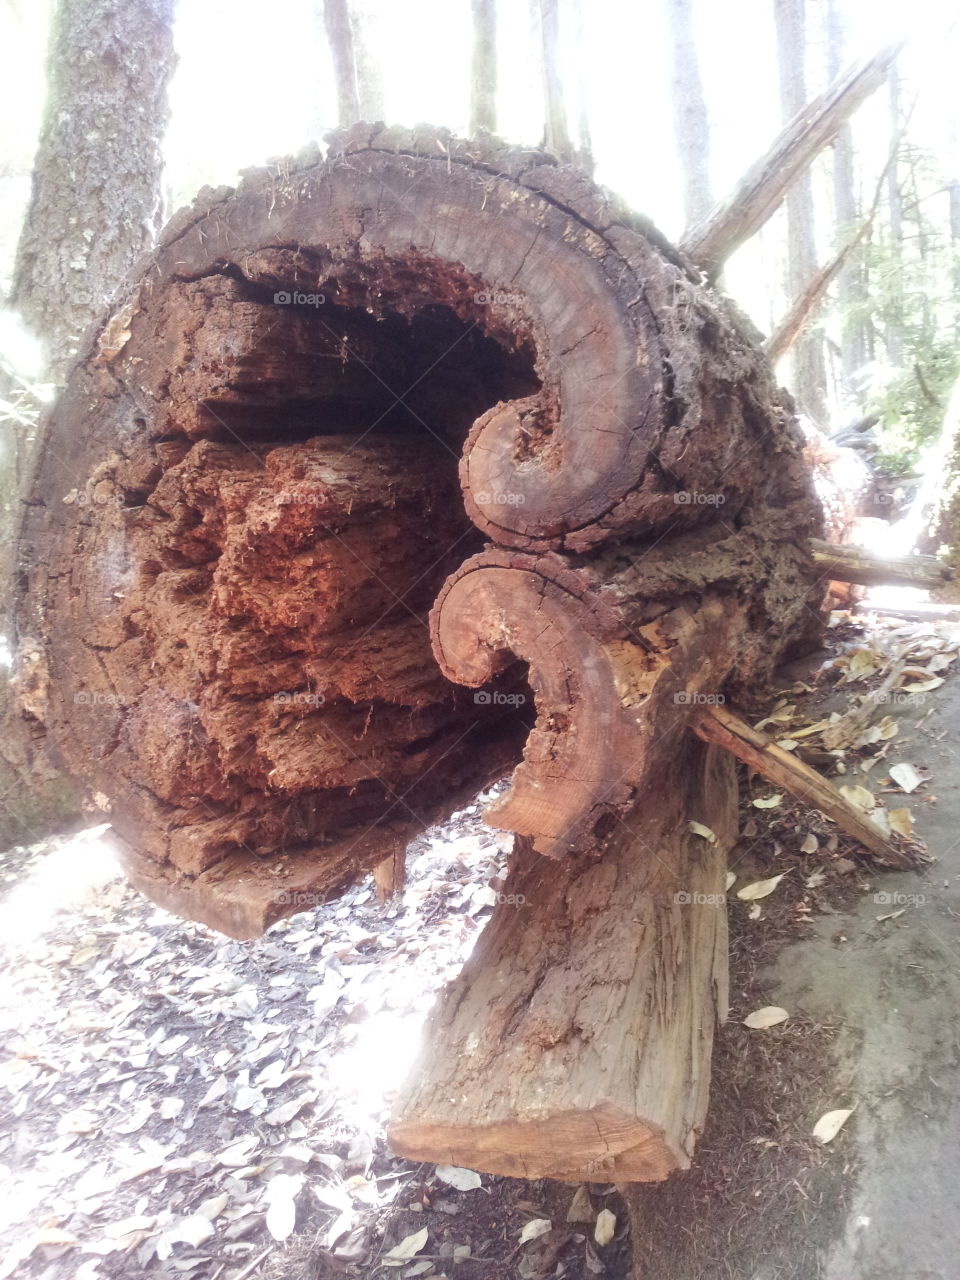 Saw this tree while hiking.